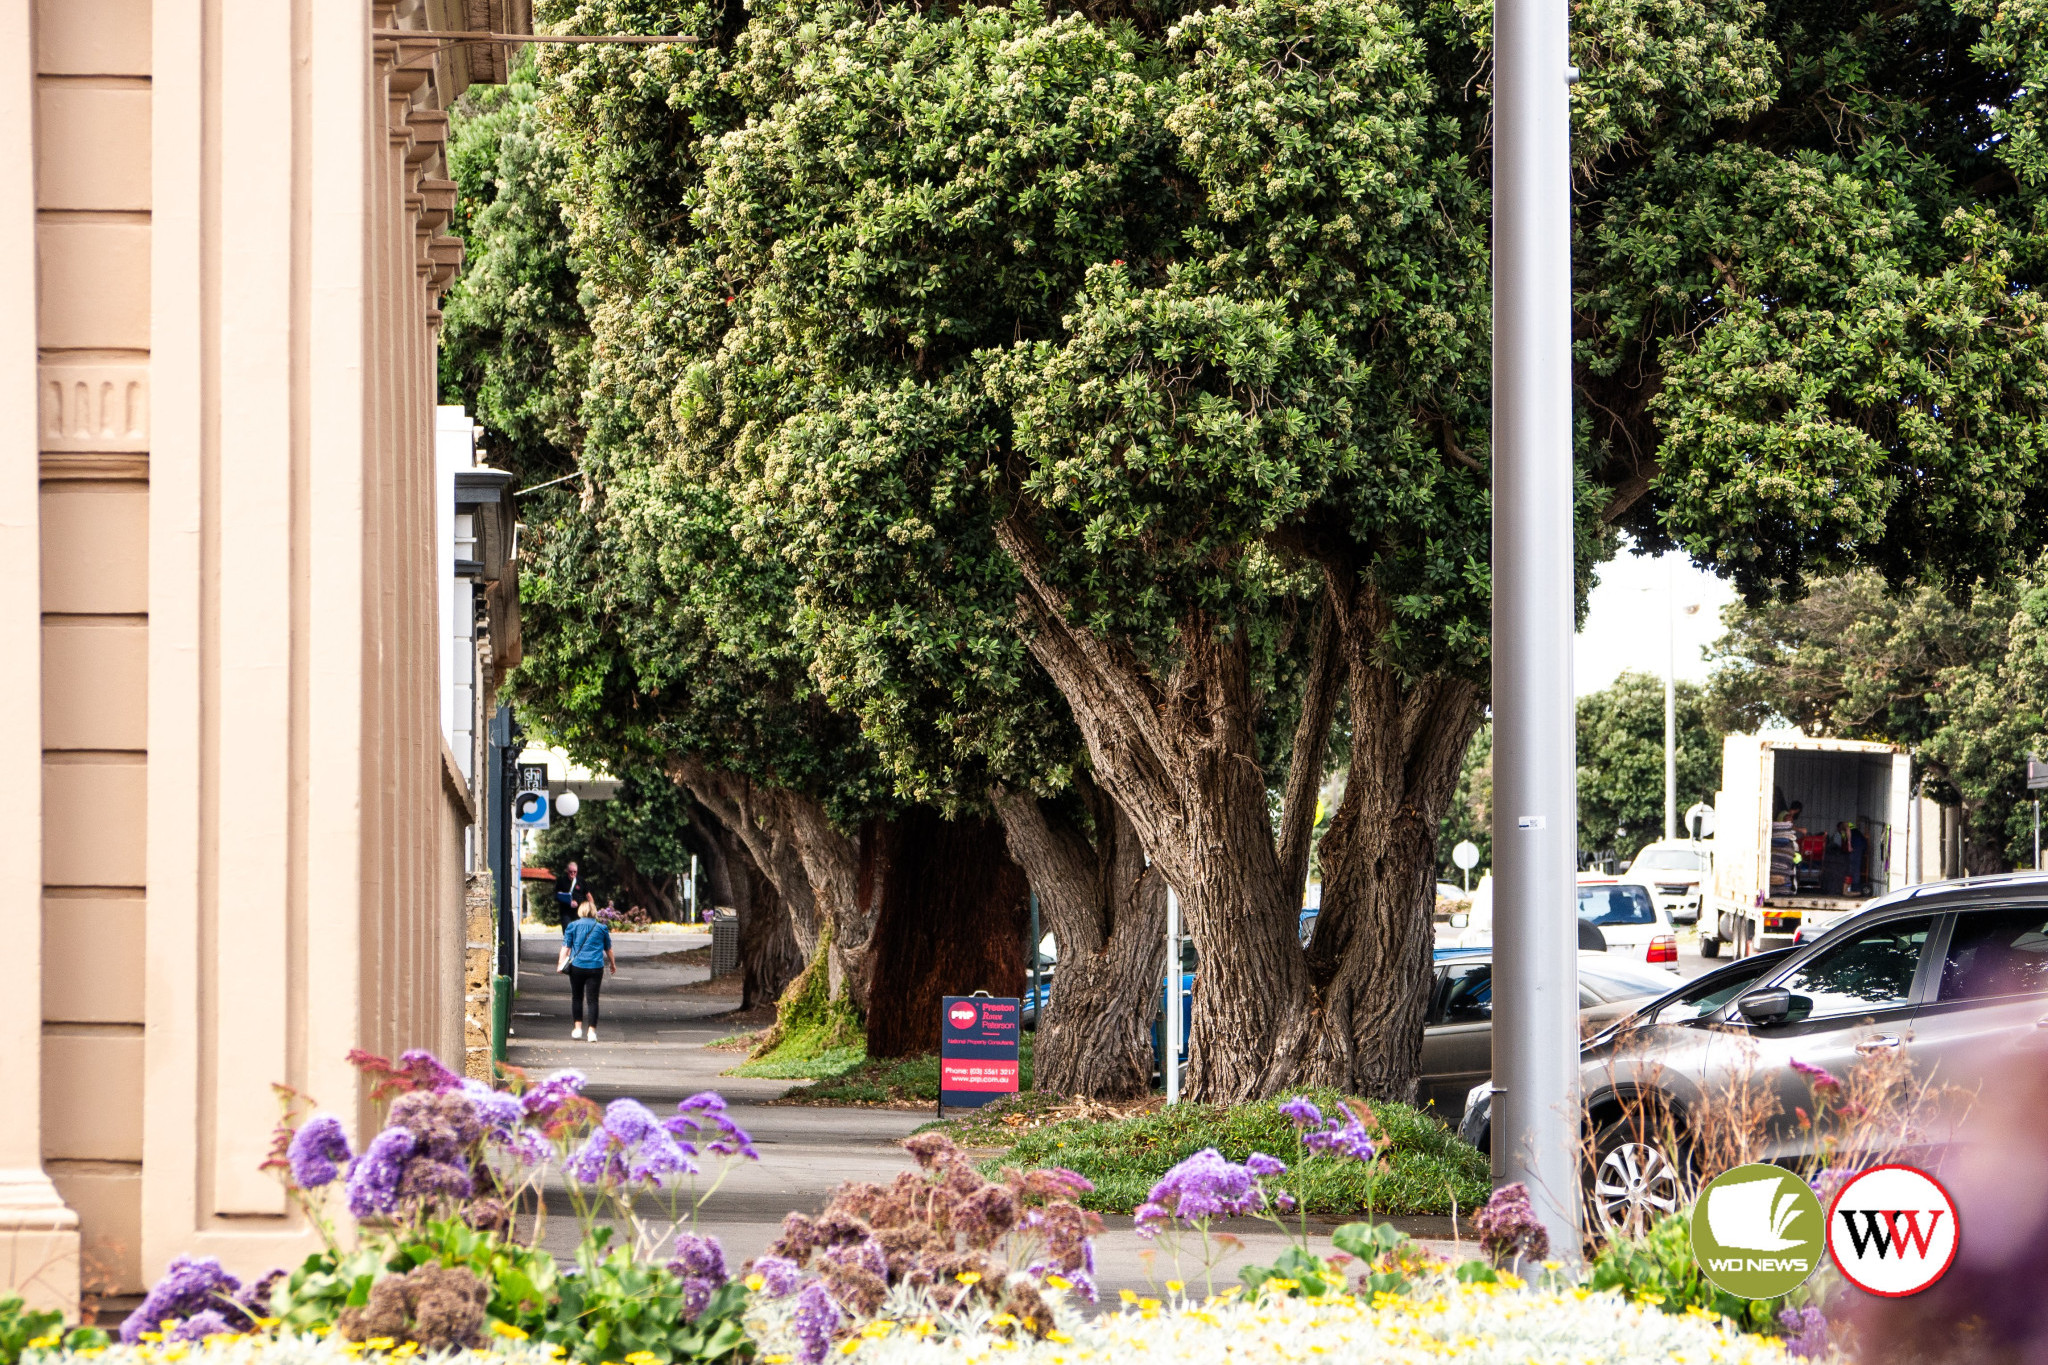 Kepler Street trees to stay - feature photo